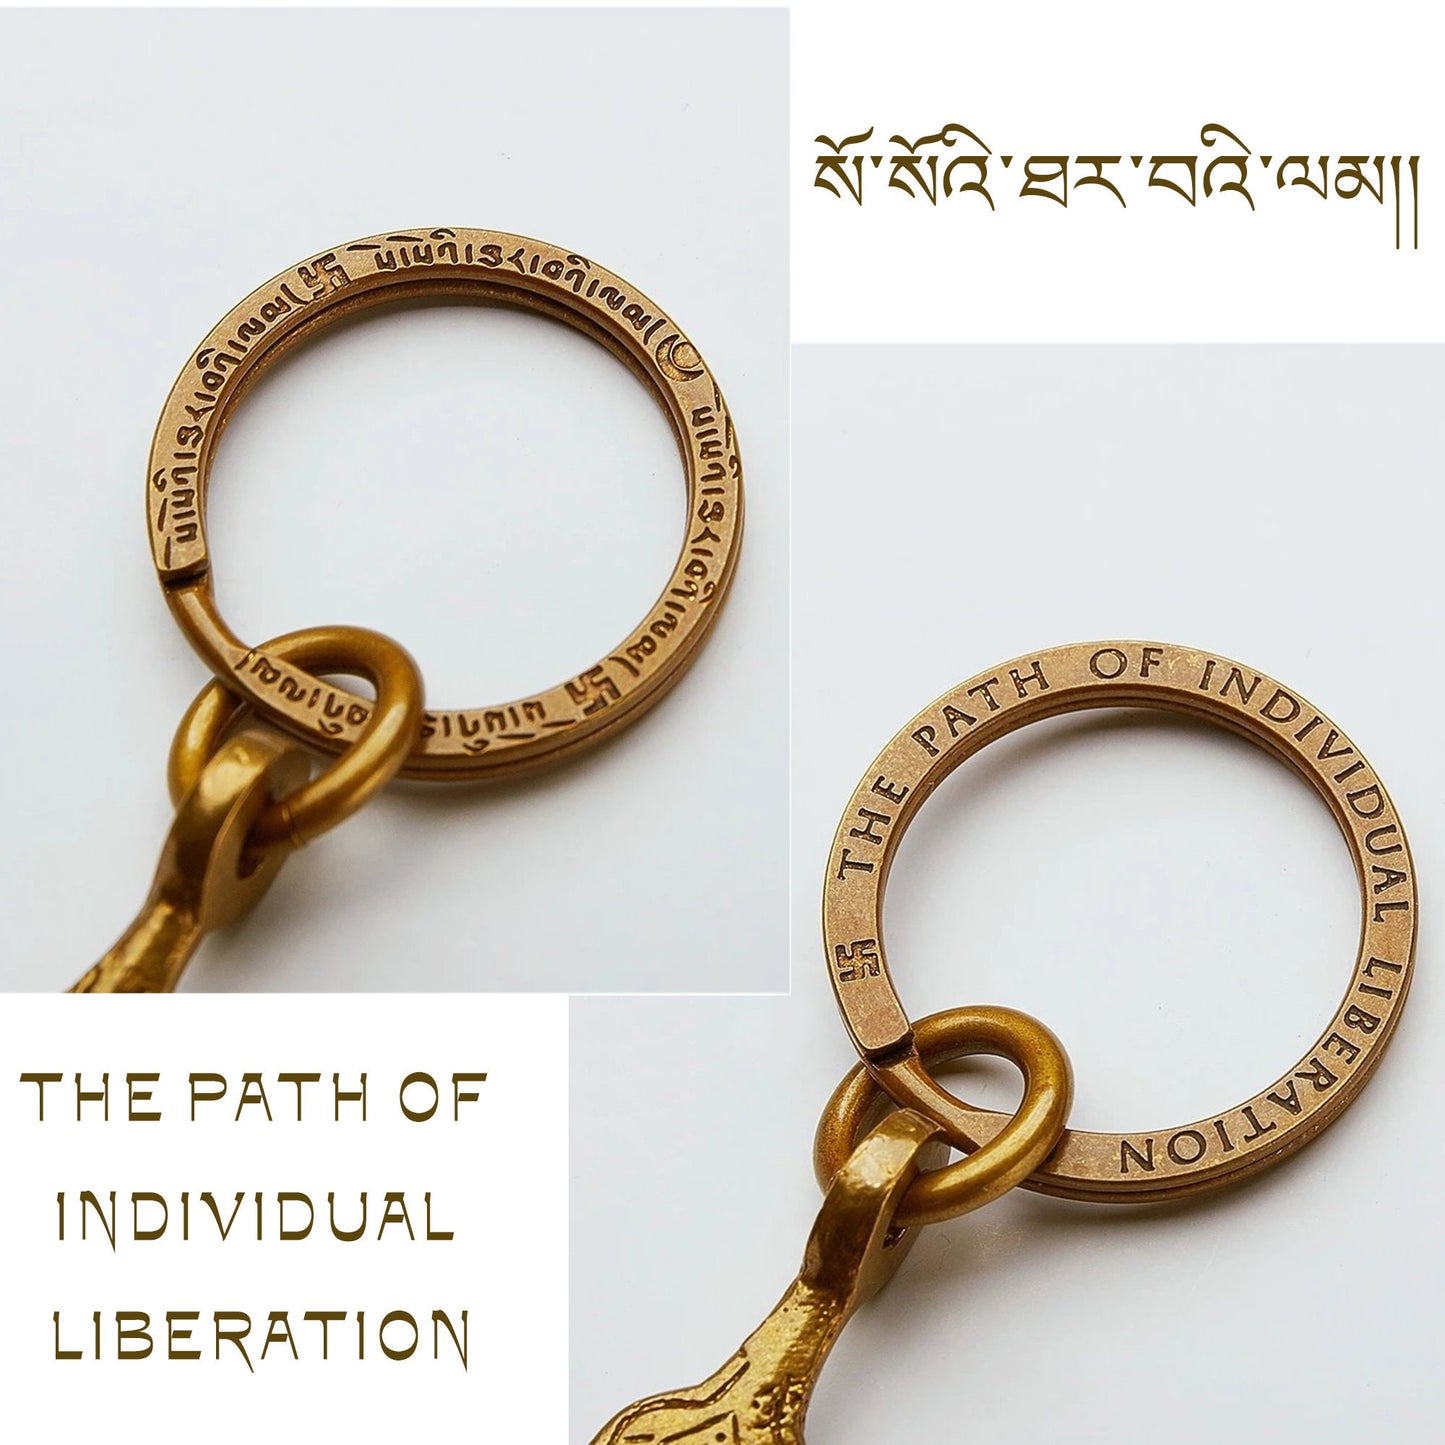 Gandhanra Antique Tibetan Amulet Keychain,The Key of Heart, Trantic Buddhism Dharma, Himalayan Style Pendant,Made of Pure Brass